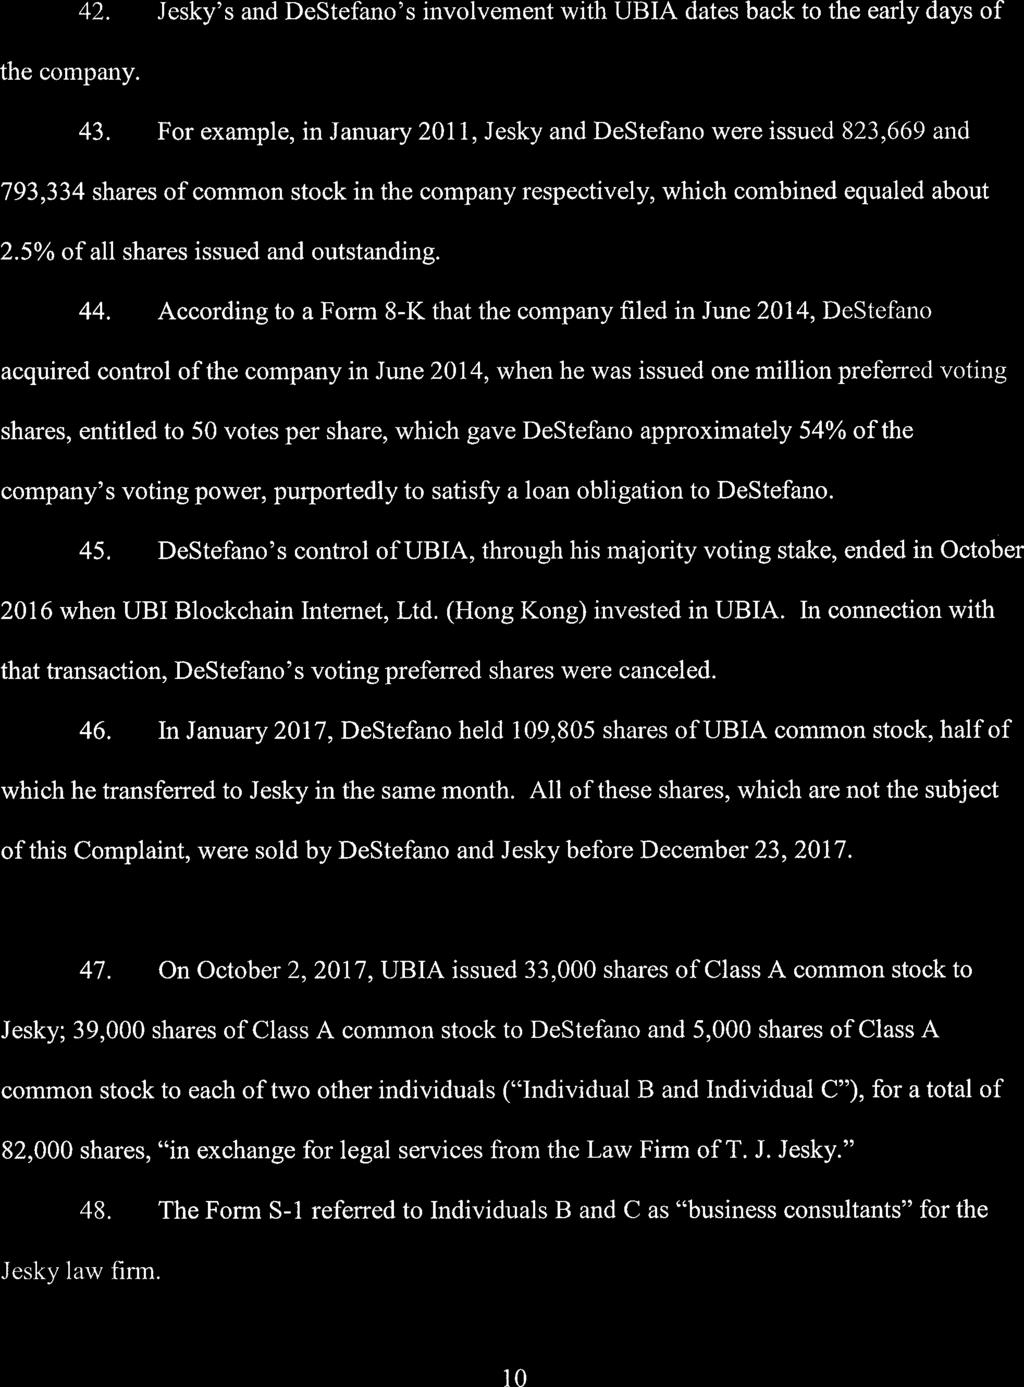 Case 1:18-cv-05980 Document 1 Filed 07/02/18 Page 10 of 16 Jeslcy's and DeStefano's Involvement in UBIA 42. Jesky's and DeStefano's involvement with UBIA dates back to the early days of the company.